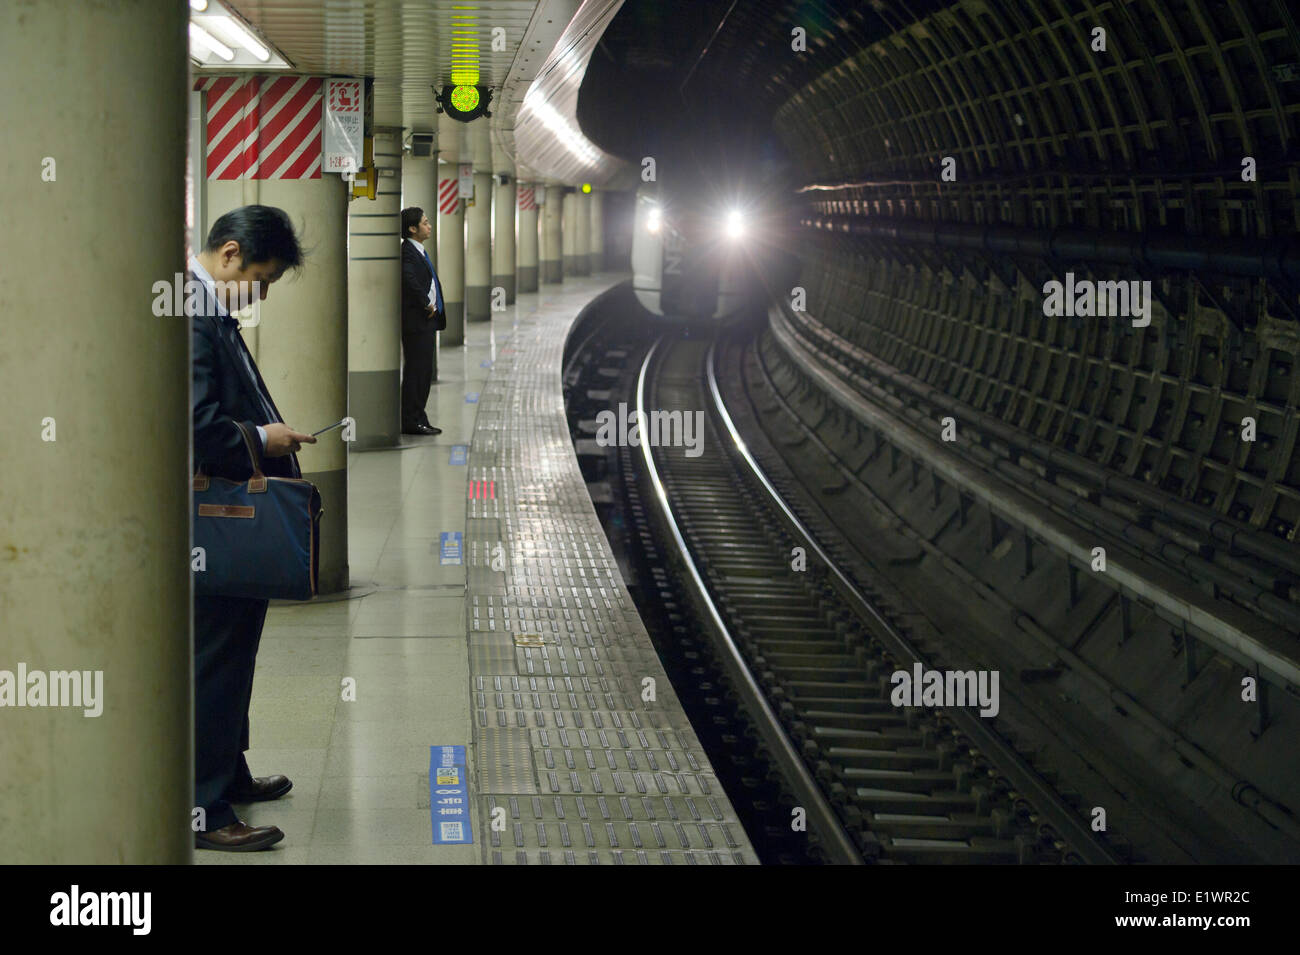 Train arriving at a platform in Tokyo Stock Photo